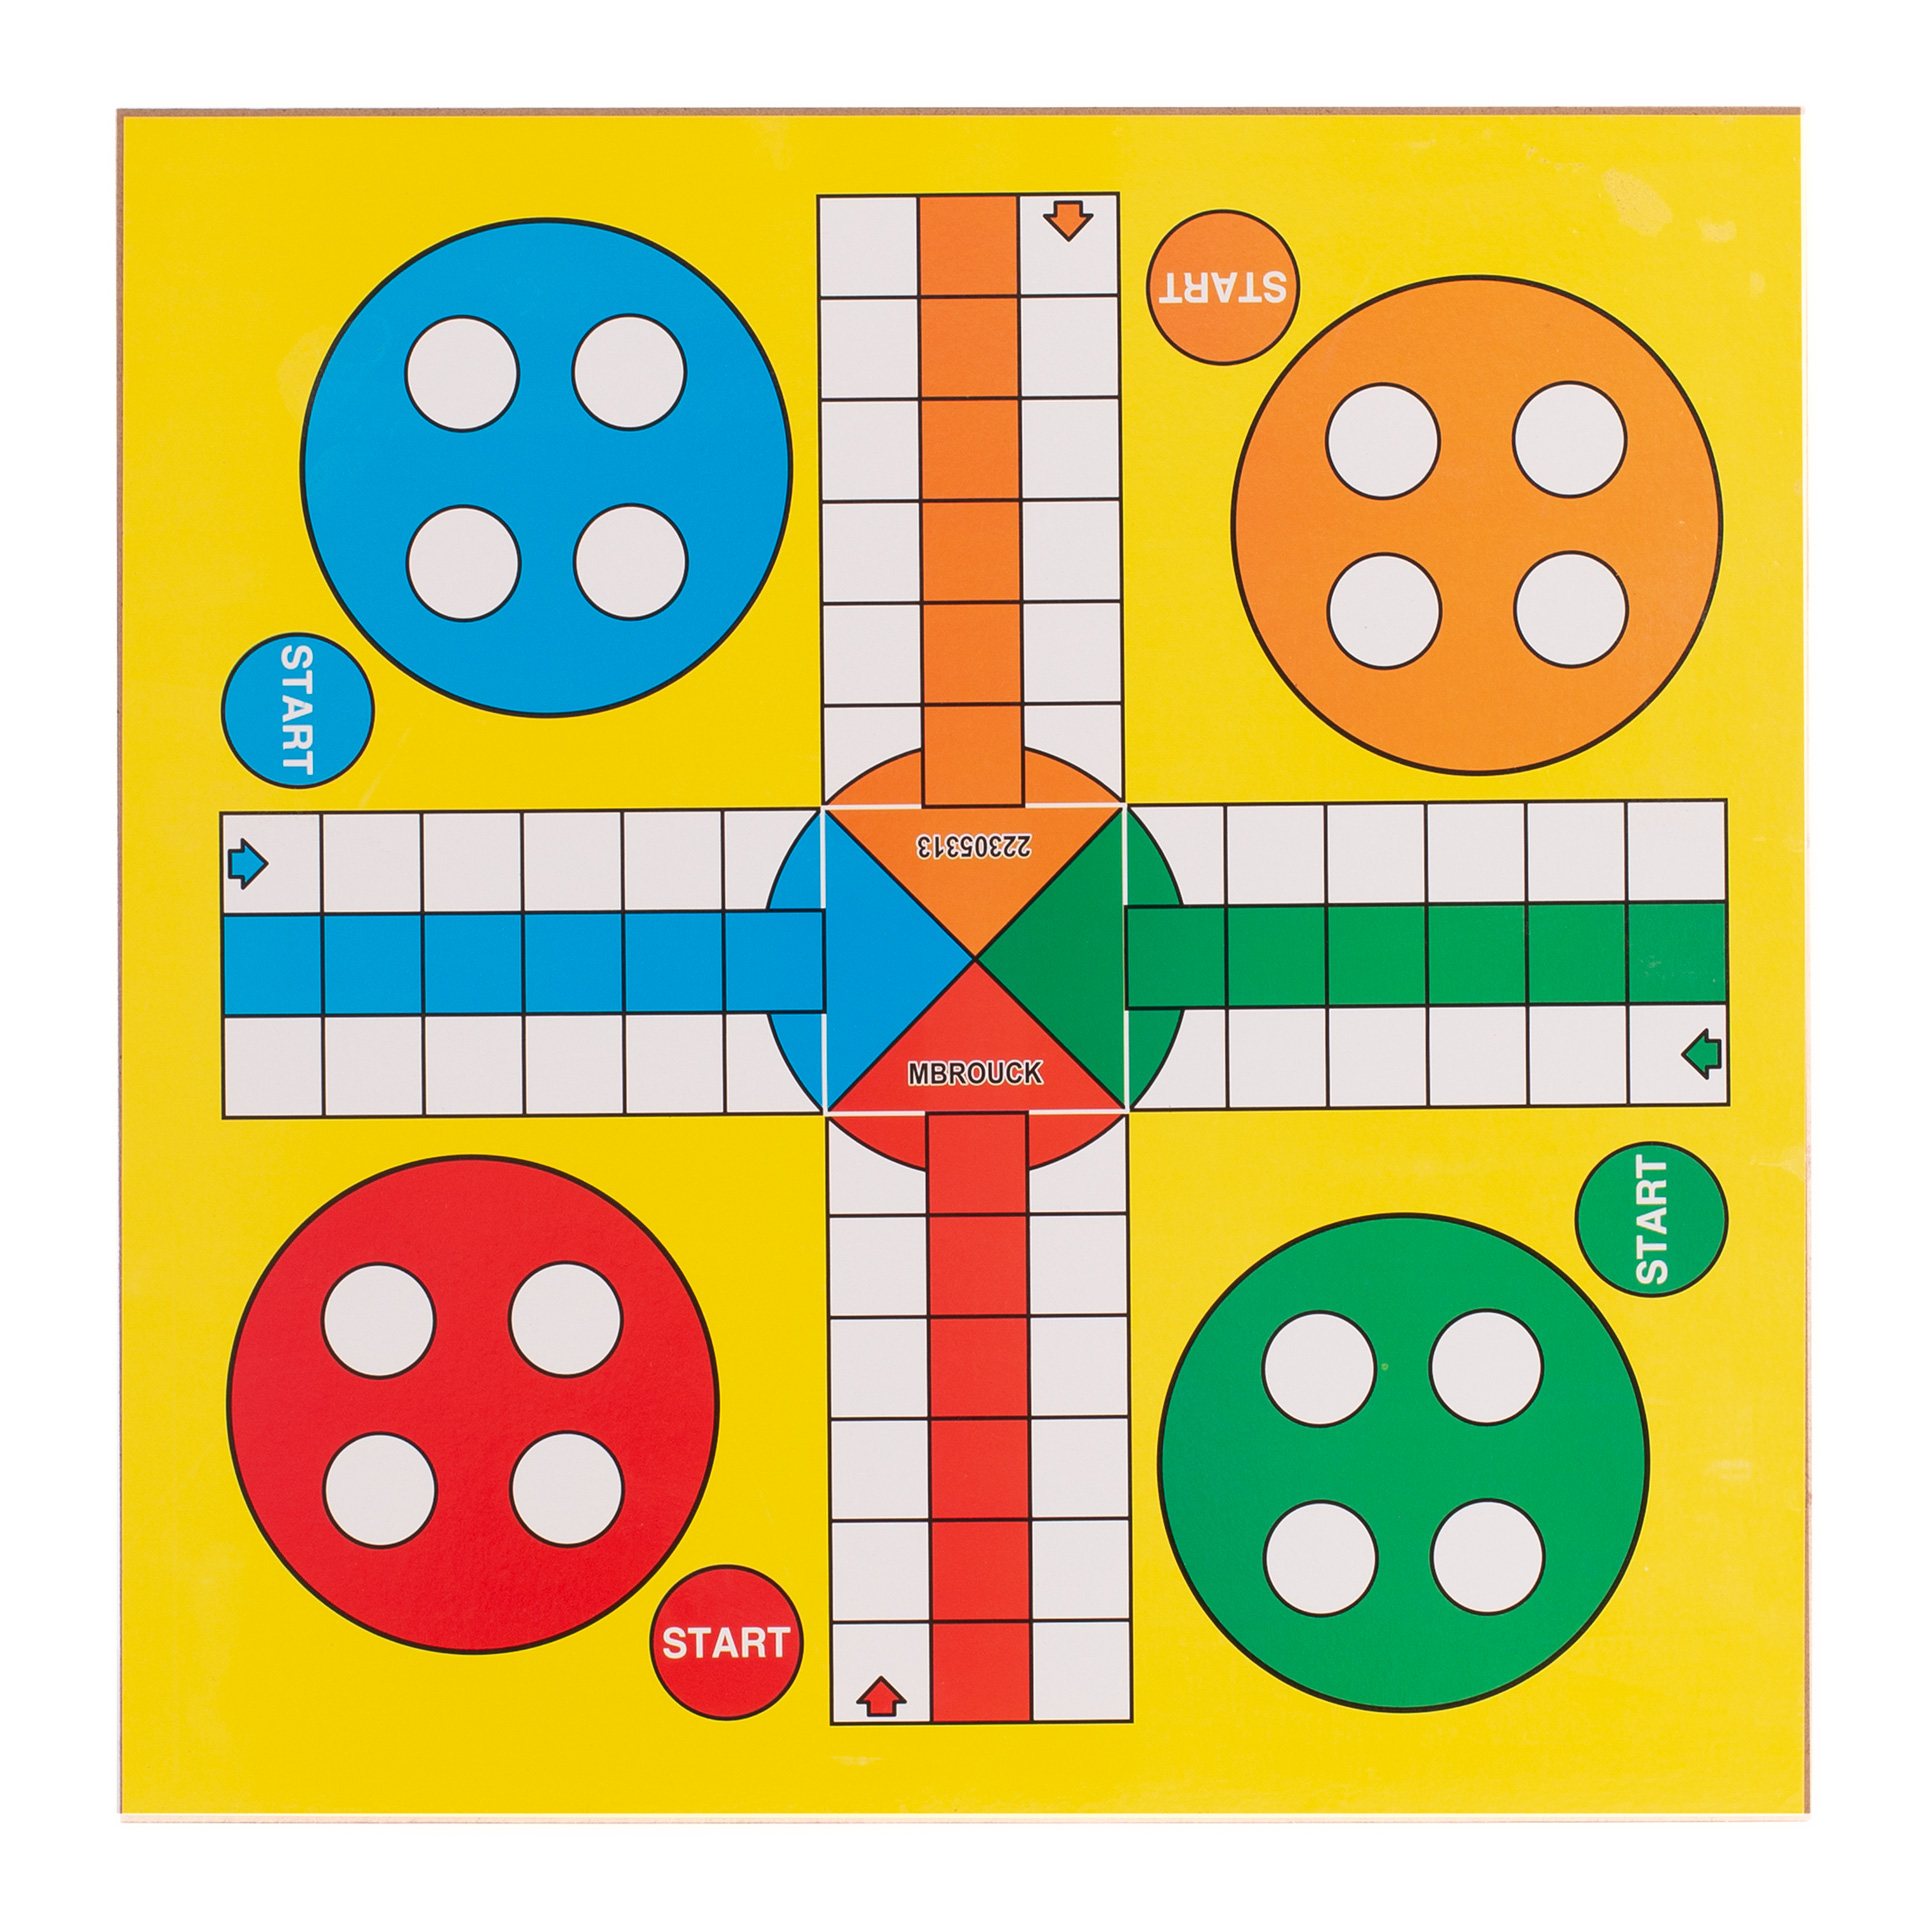 tablero parchis play 2